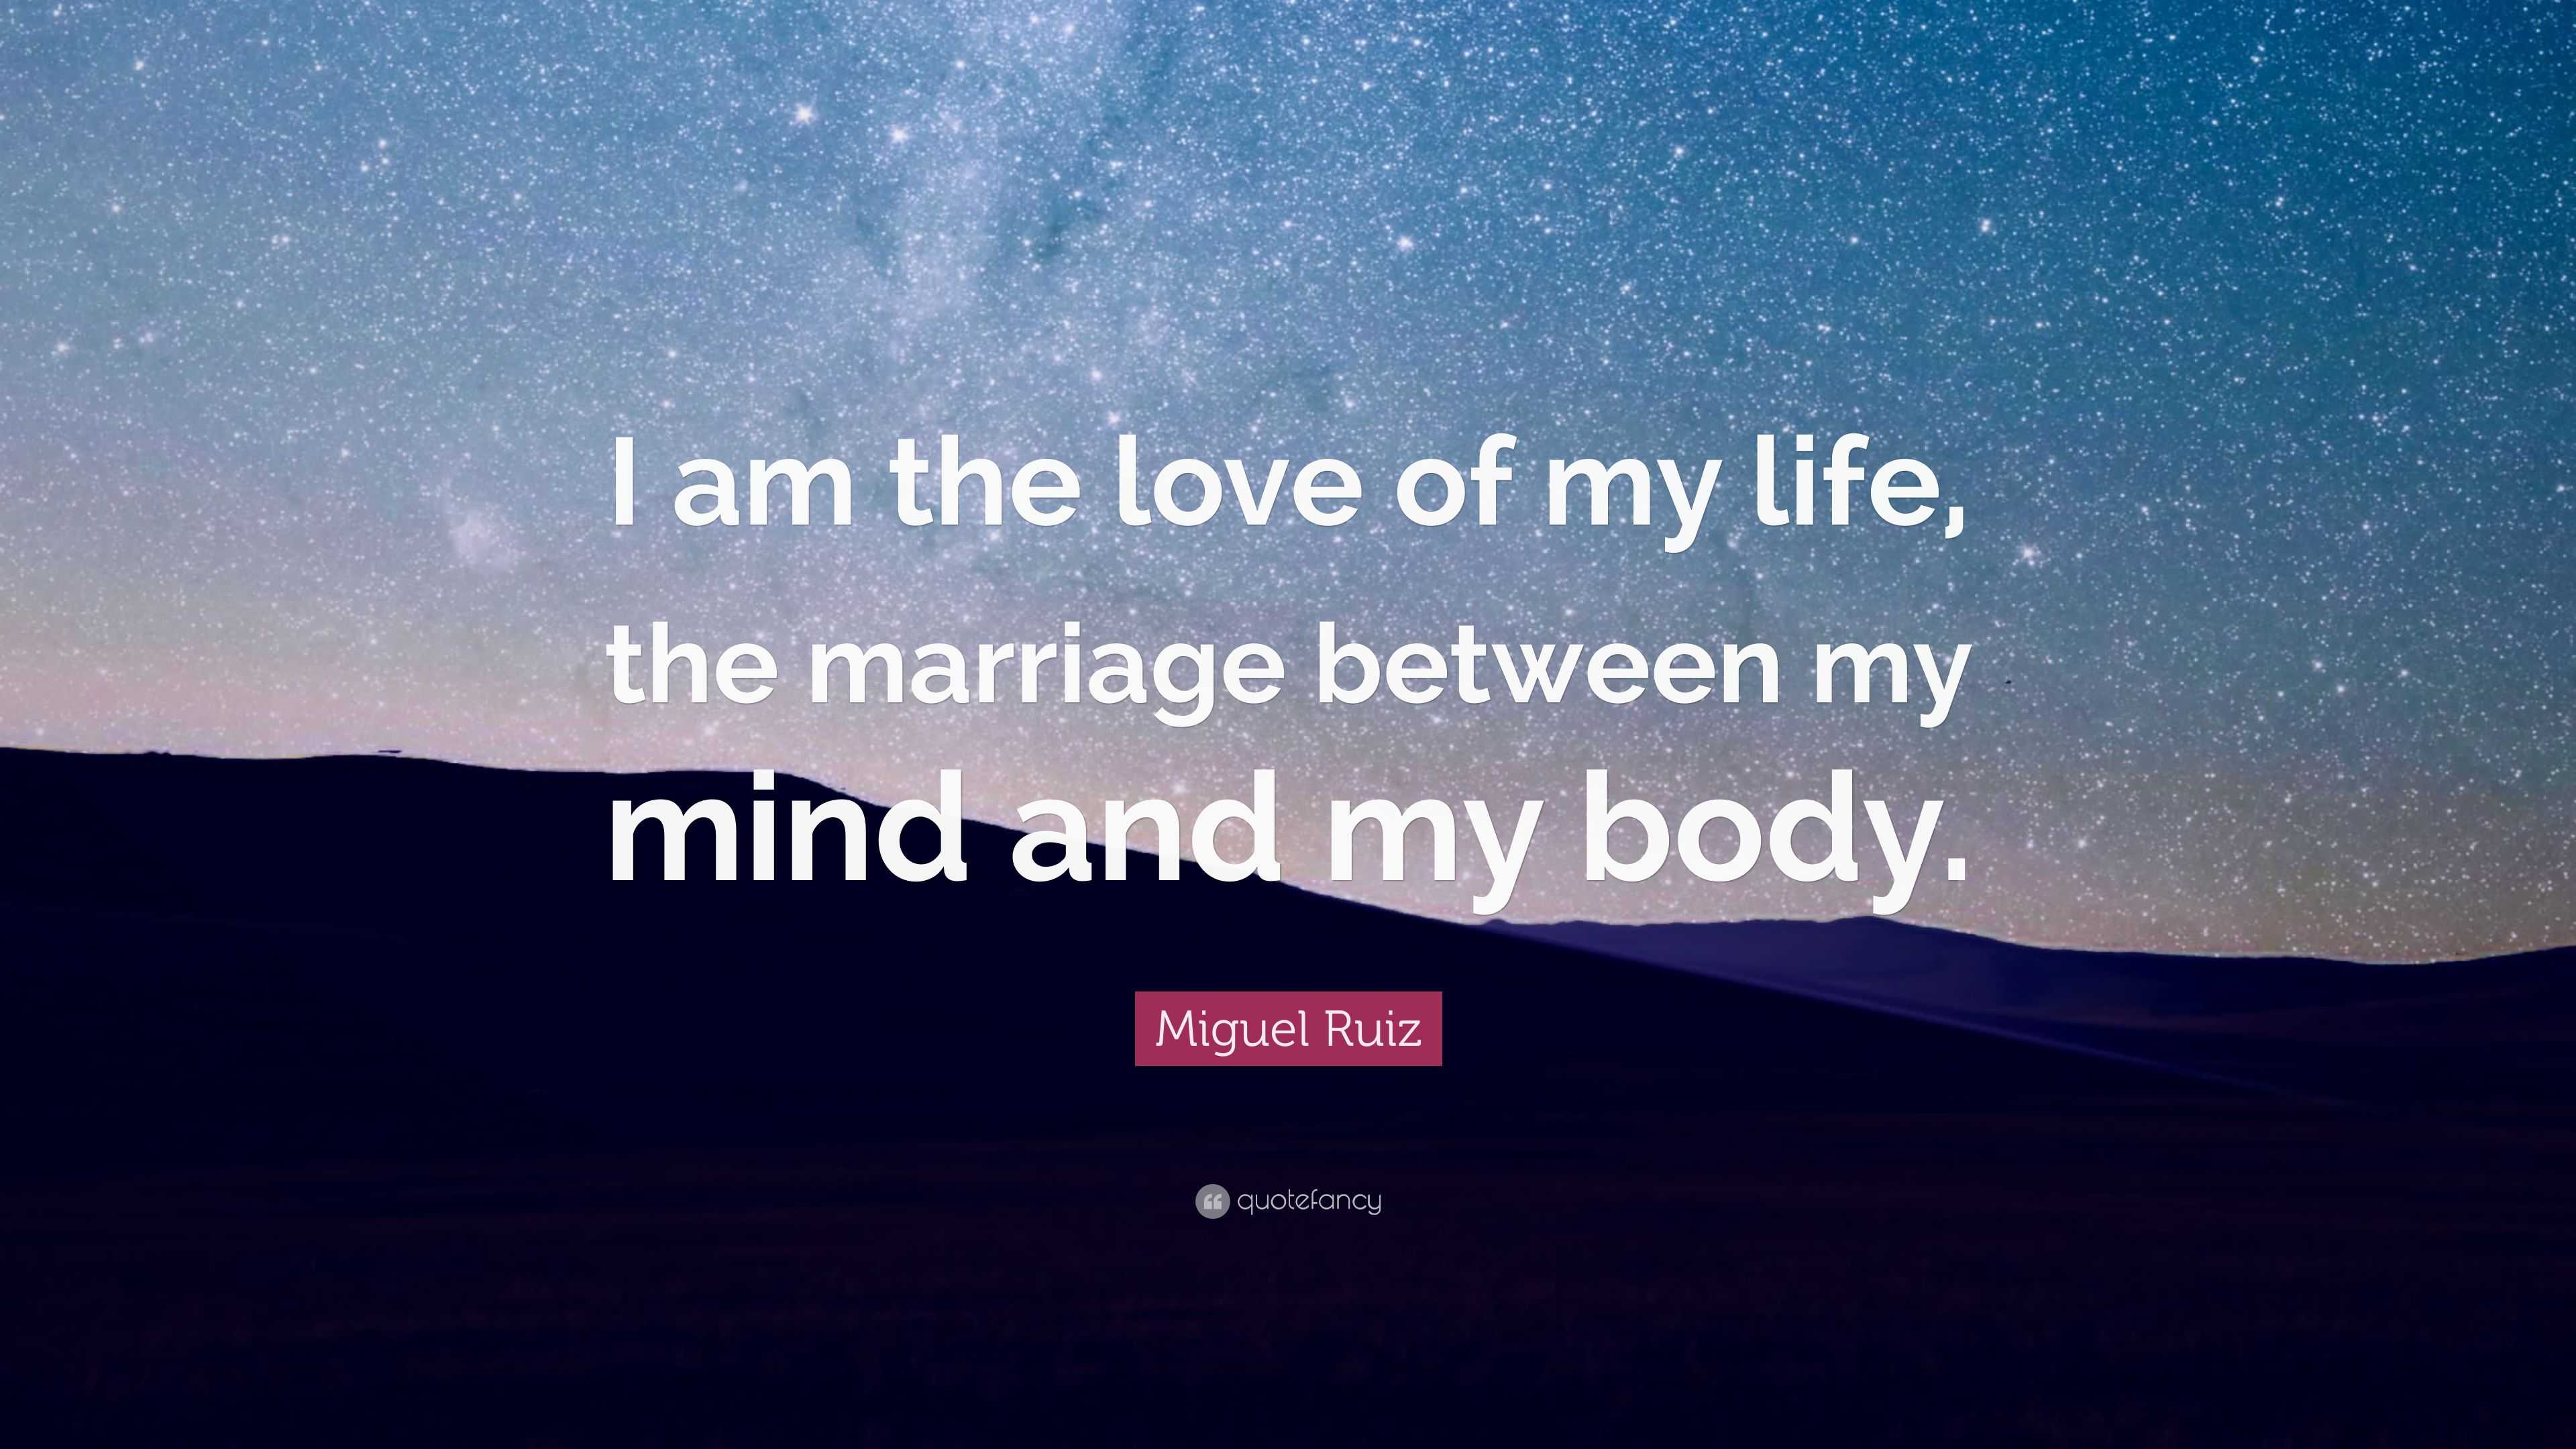 Miguel Ruiz Quote “I am the love of my life the marriage between